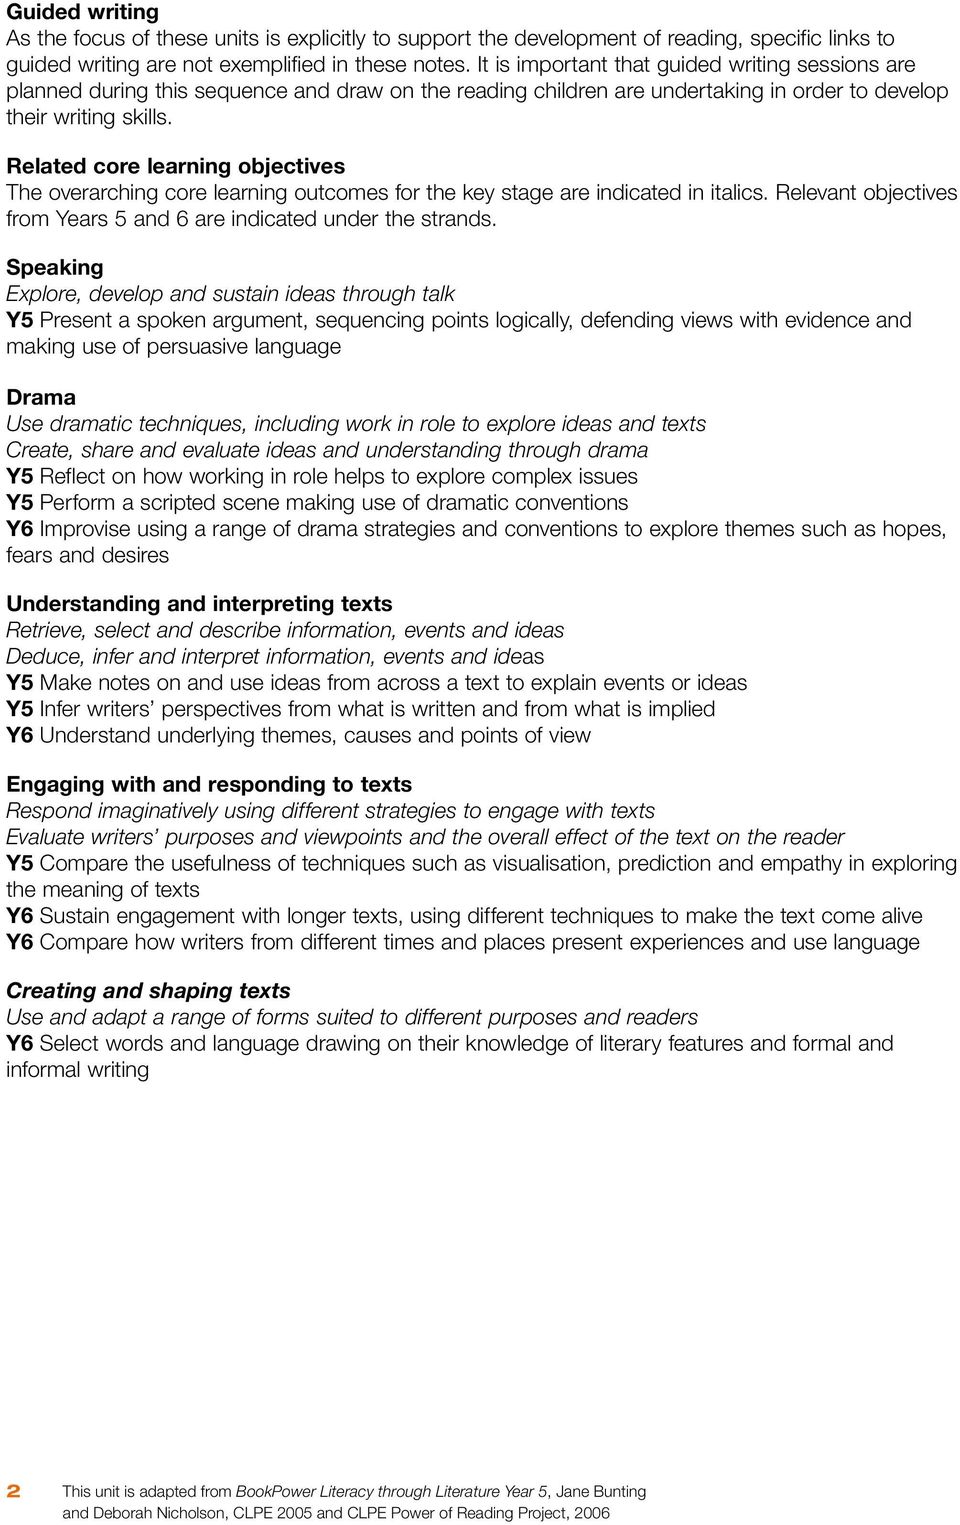 Related core learning objectives The overarching core learning outcomes for the key stage are indicated in italics. Relevant objectives from Years 5 and 6 are indicated under the strands.